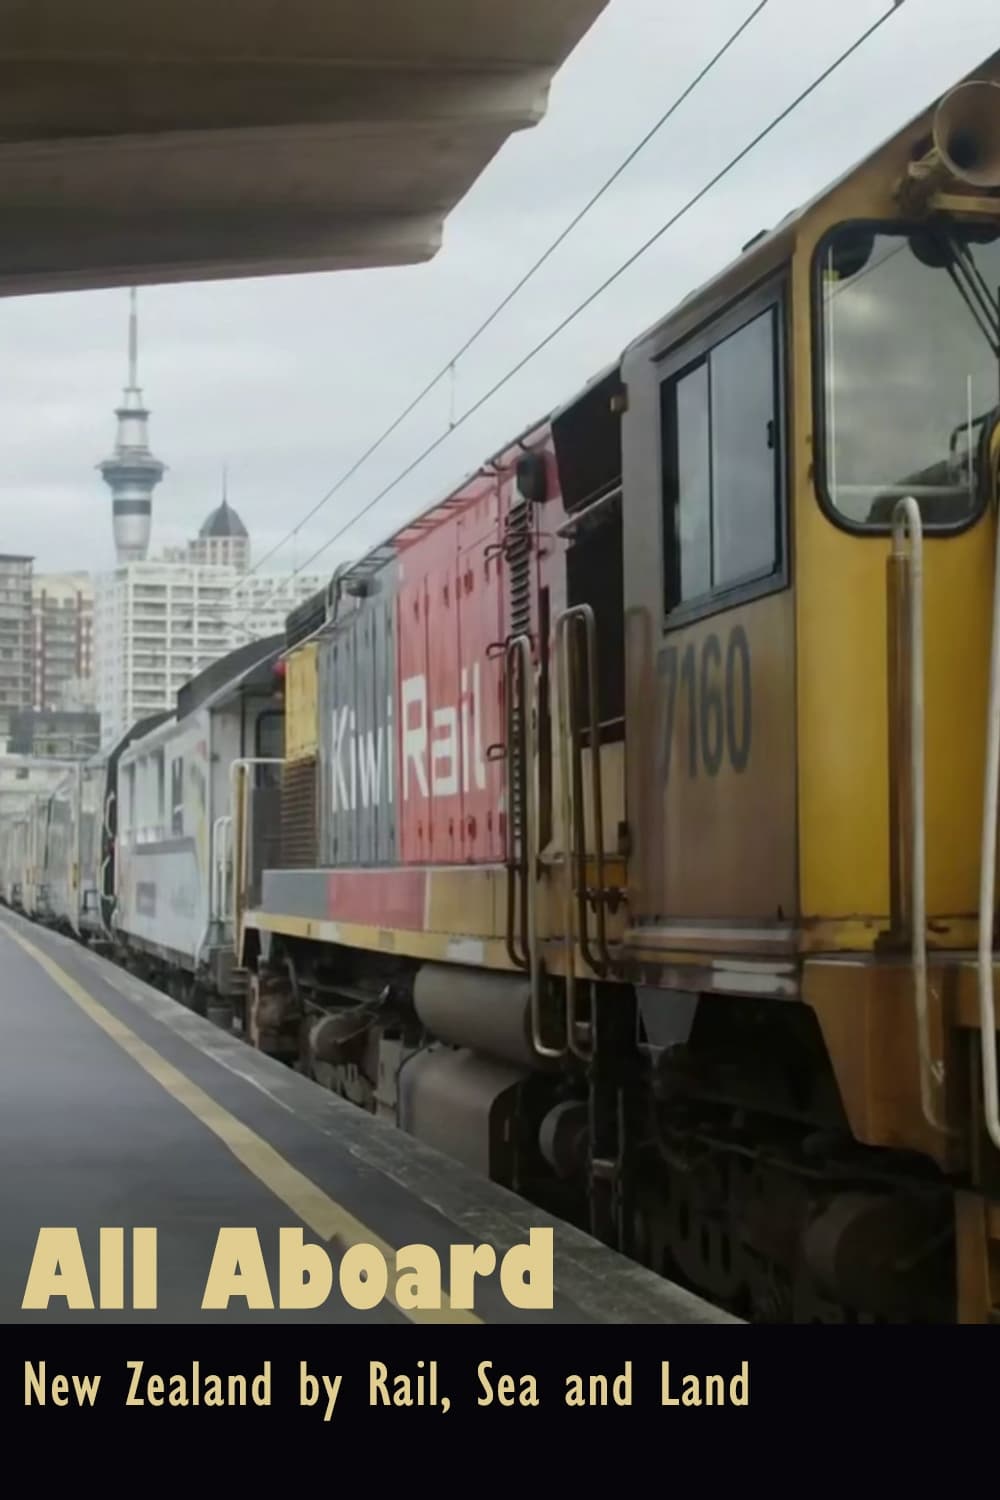 All Aboard! New Zealand by Rail, Sea and Land